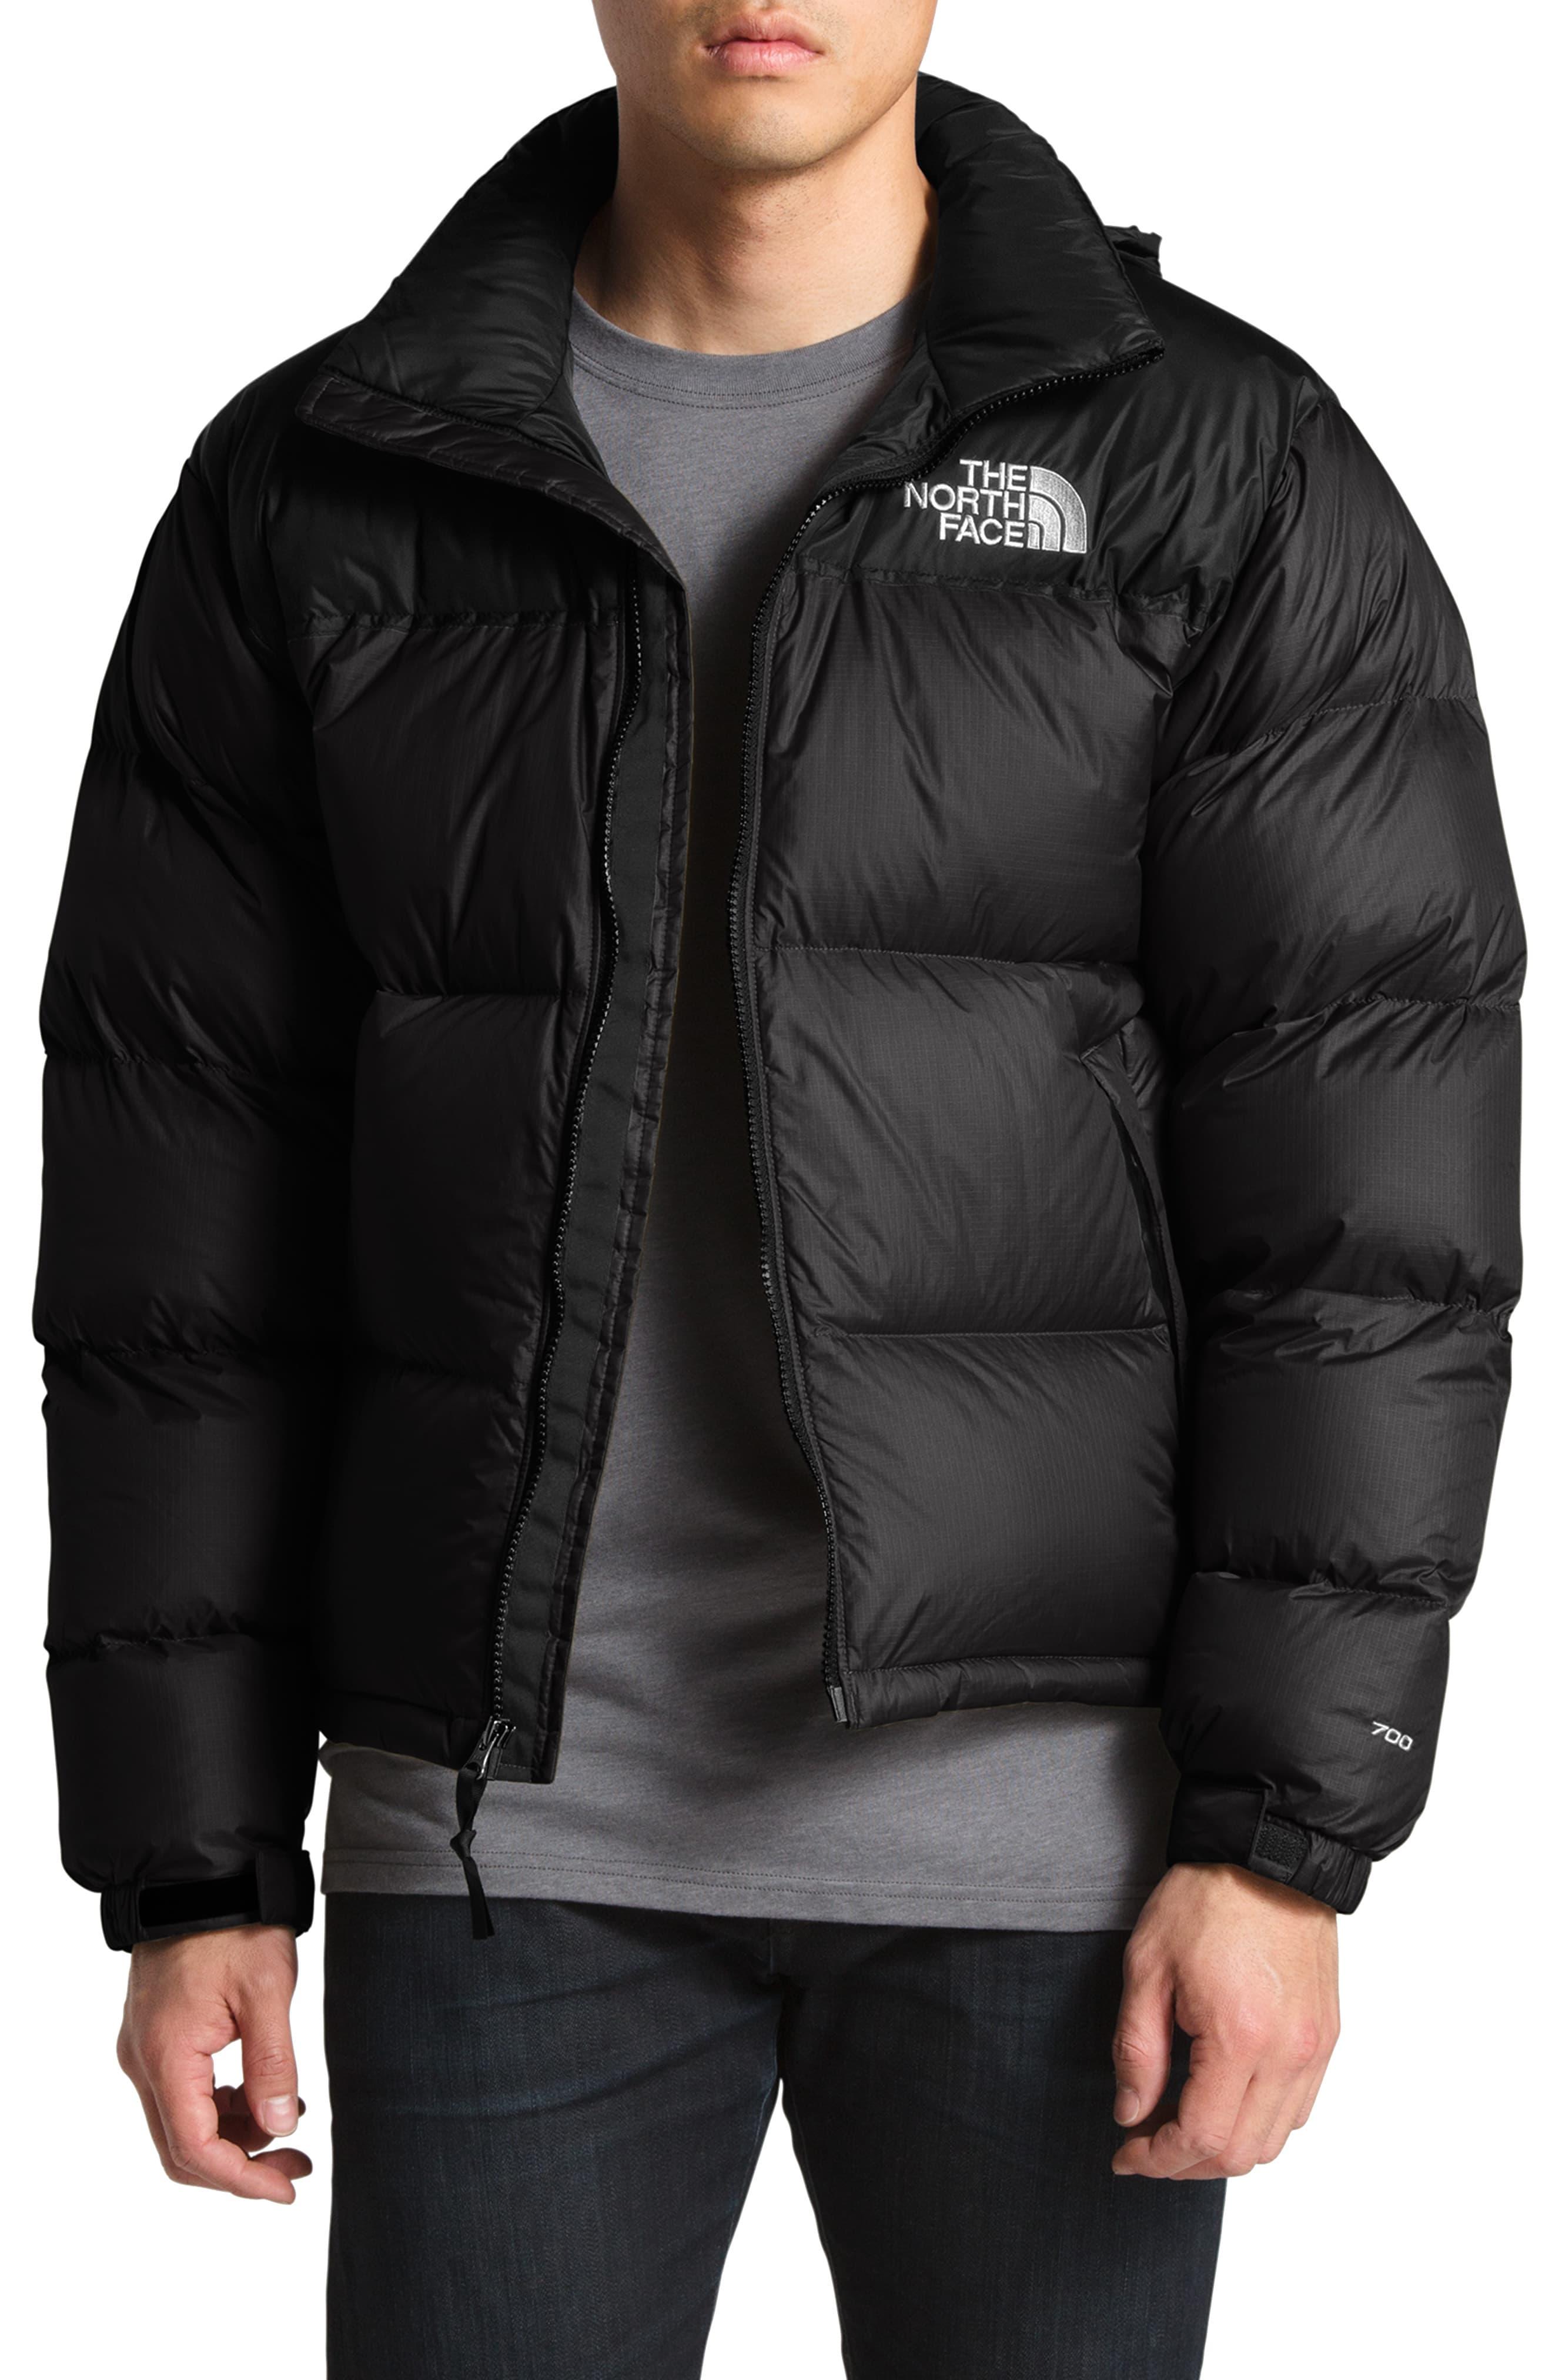 The North Face 1996 Retro Nuptse Jacket in Brown for Men | Lyst